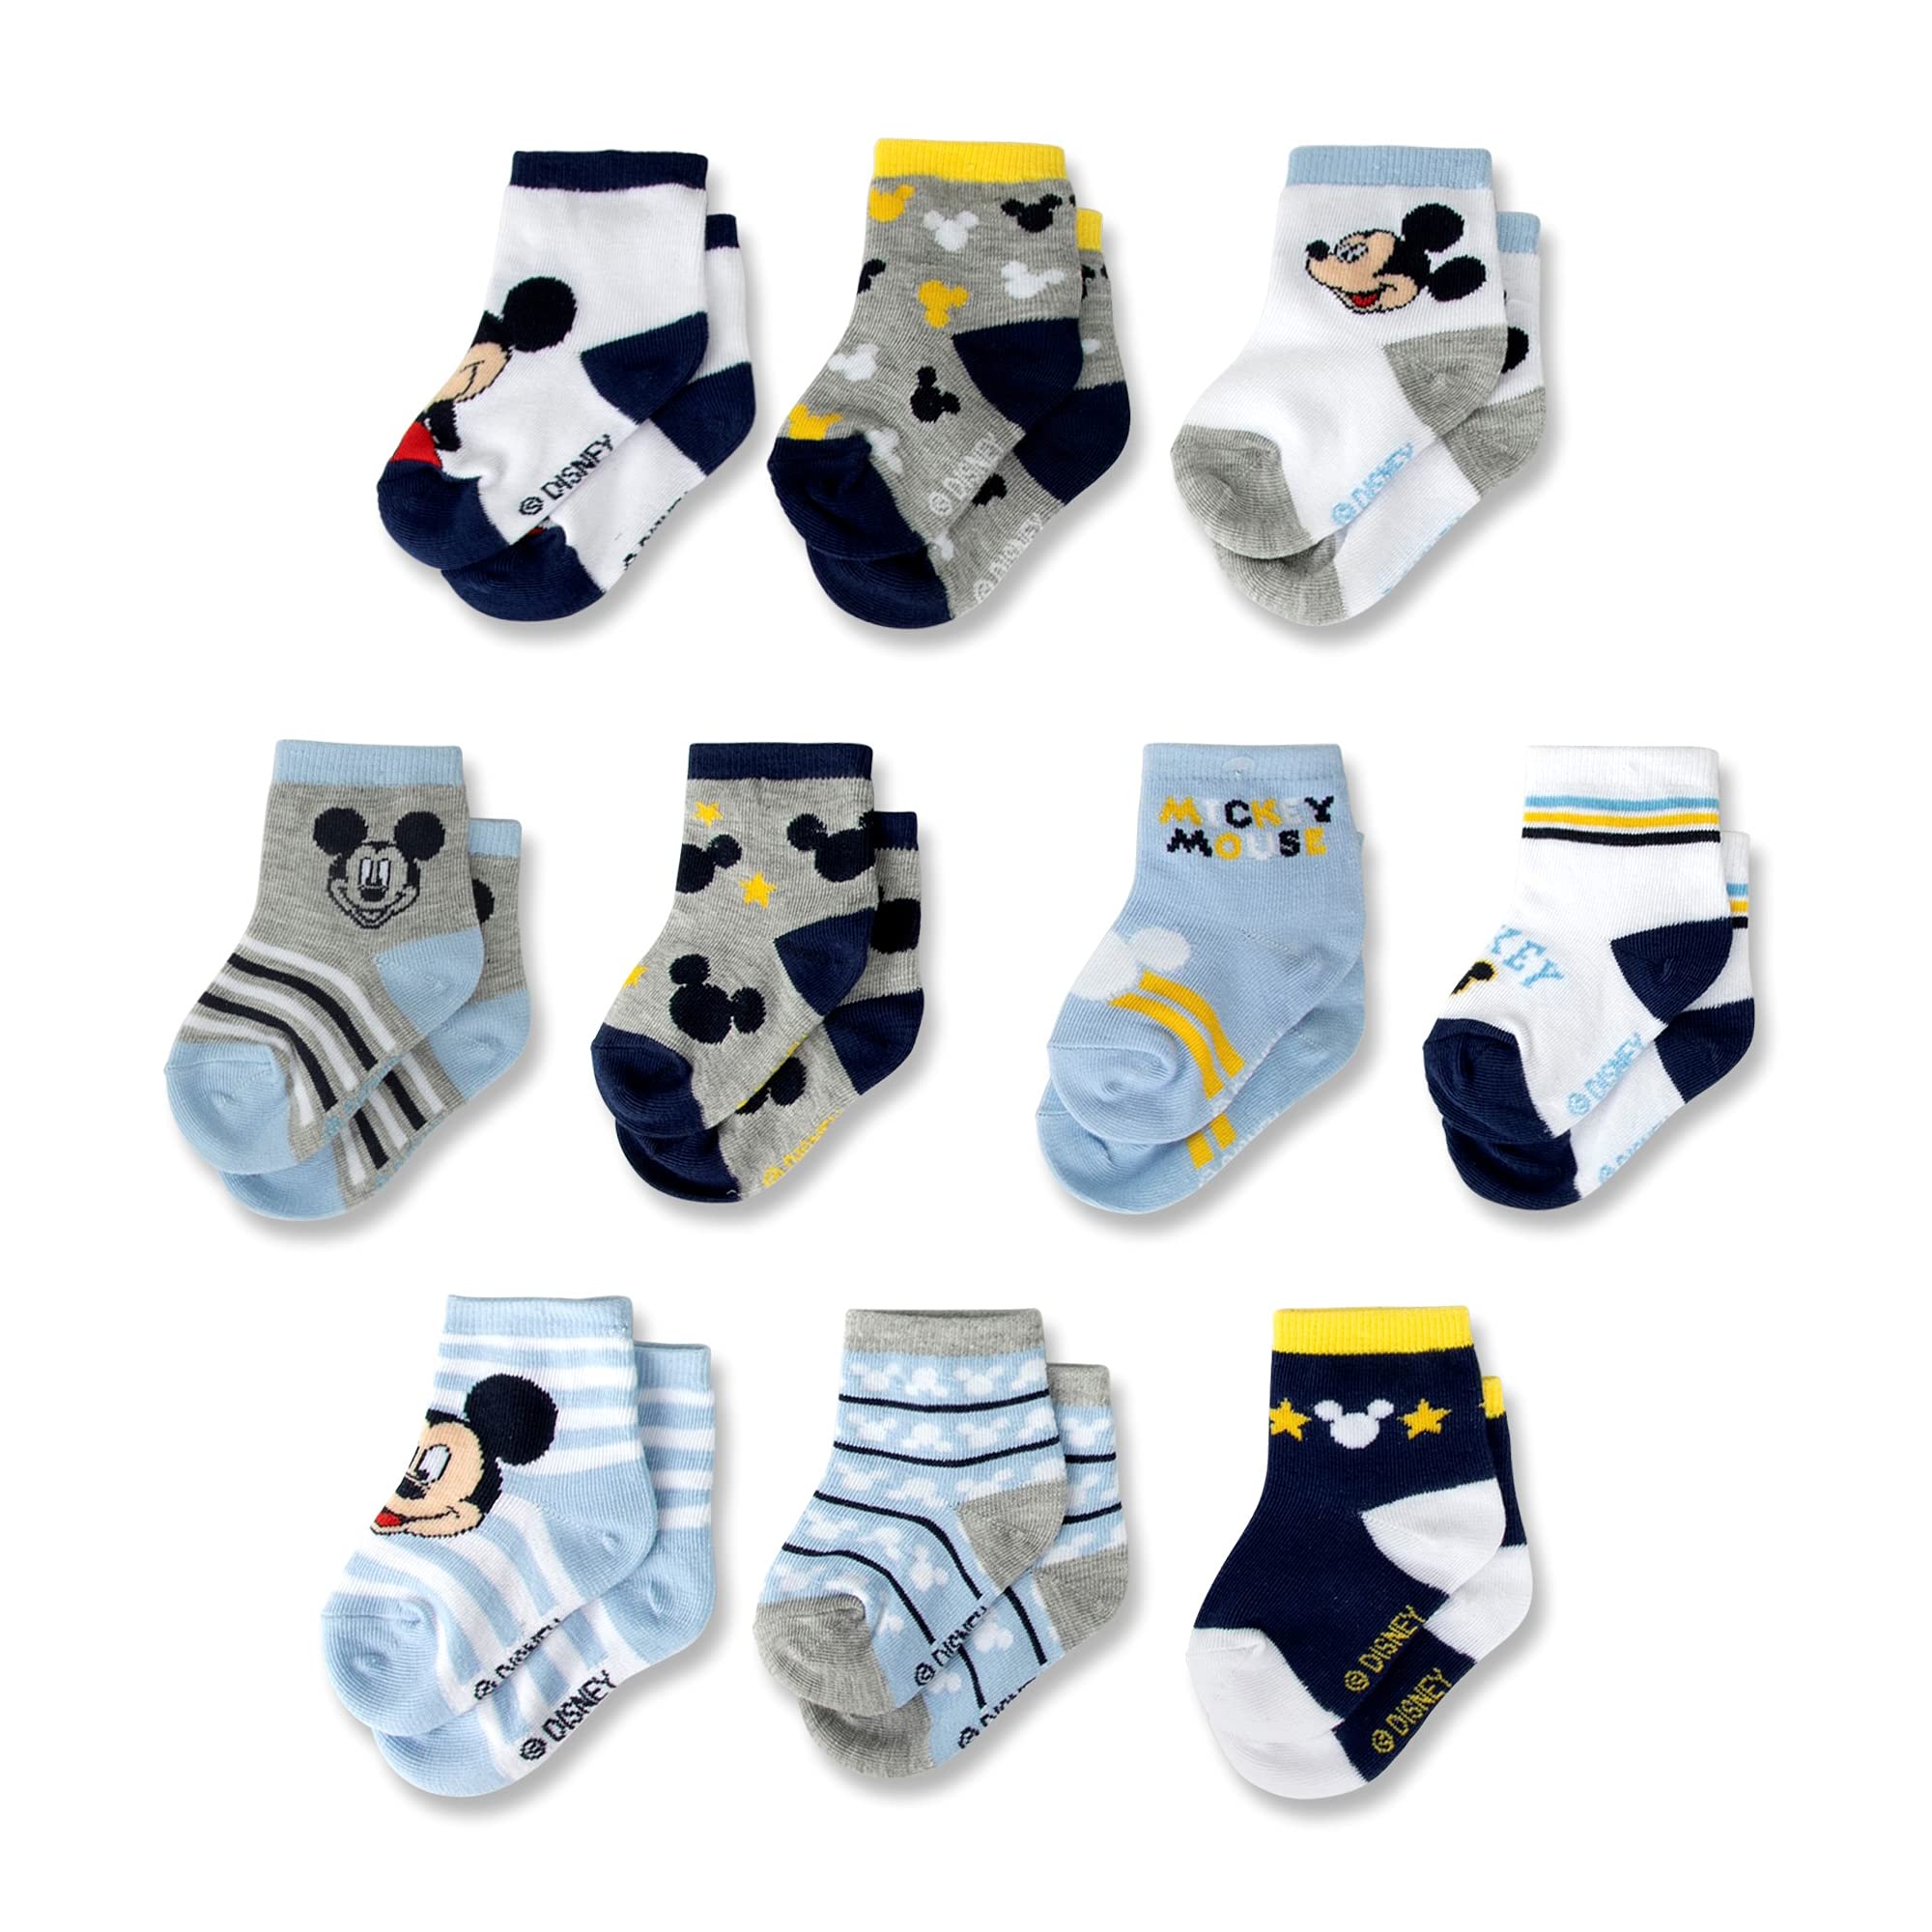 Disney 10-Pack Mickey Mouse Baby Boy Infant Sock, Multicolor - 0-24 Months